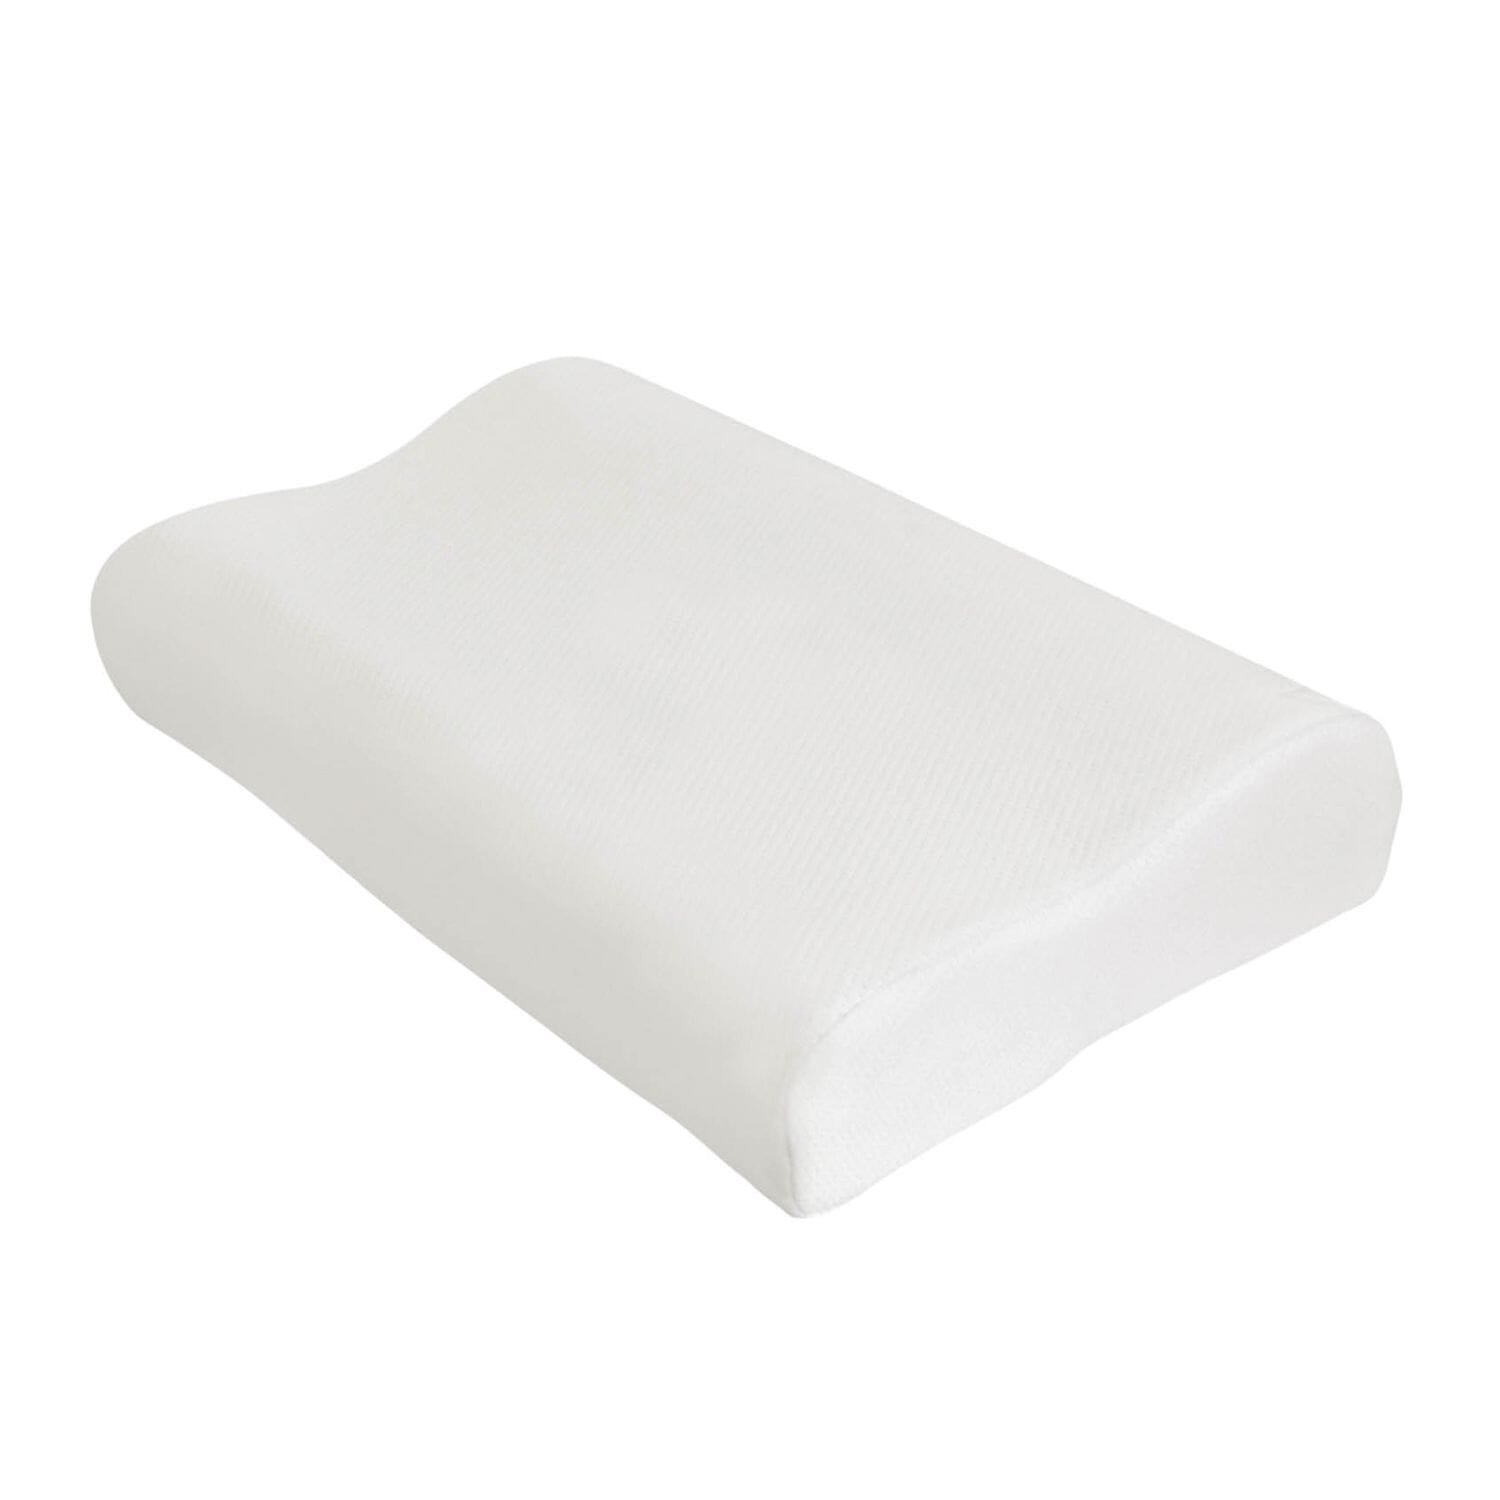 View Gel and Memory Foam Contoured Pillow information